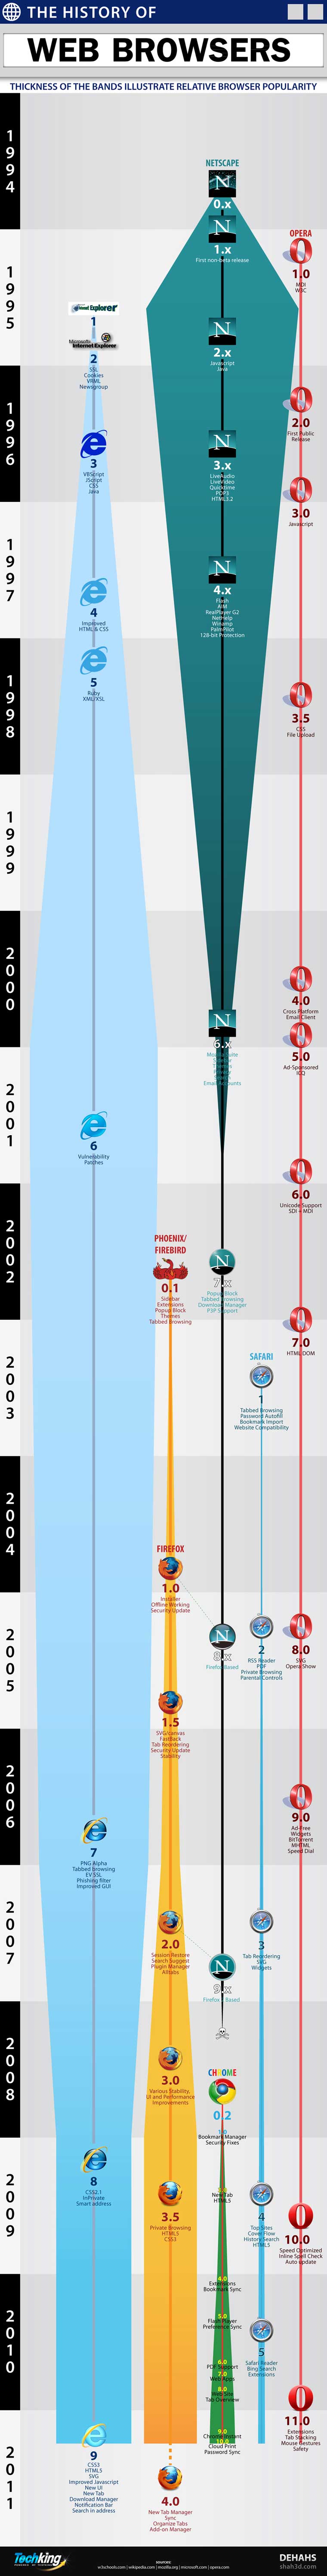 Browser Evolution – The History of Web Browsers - Infographic